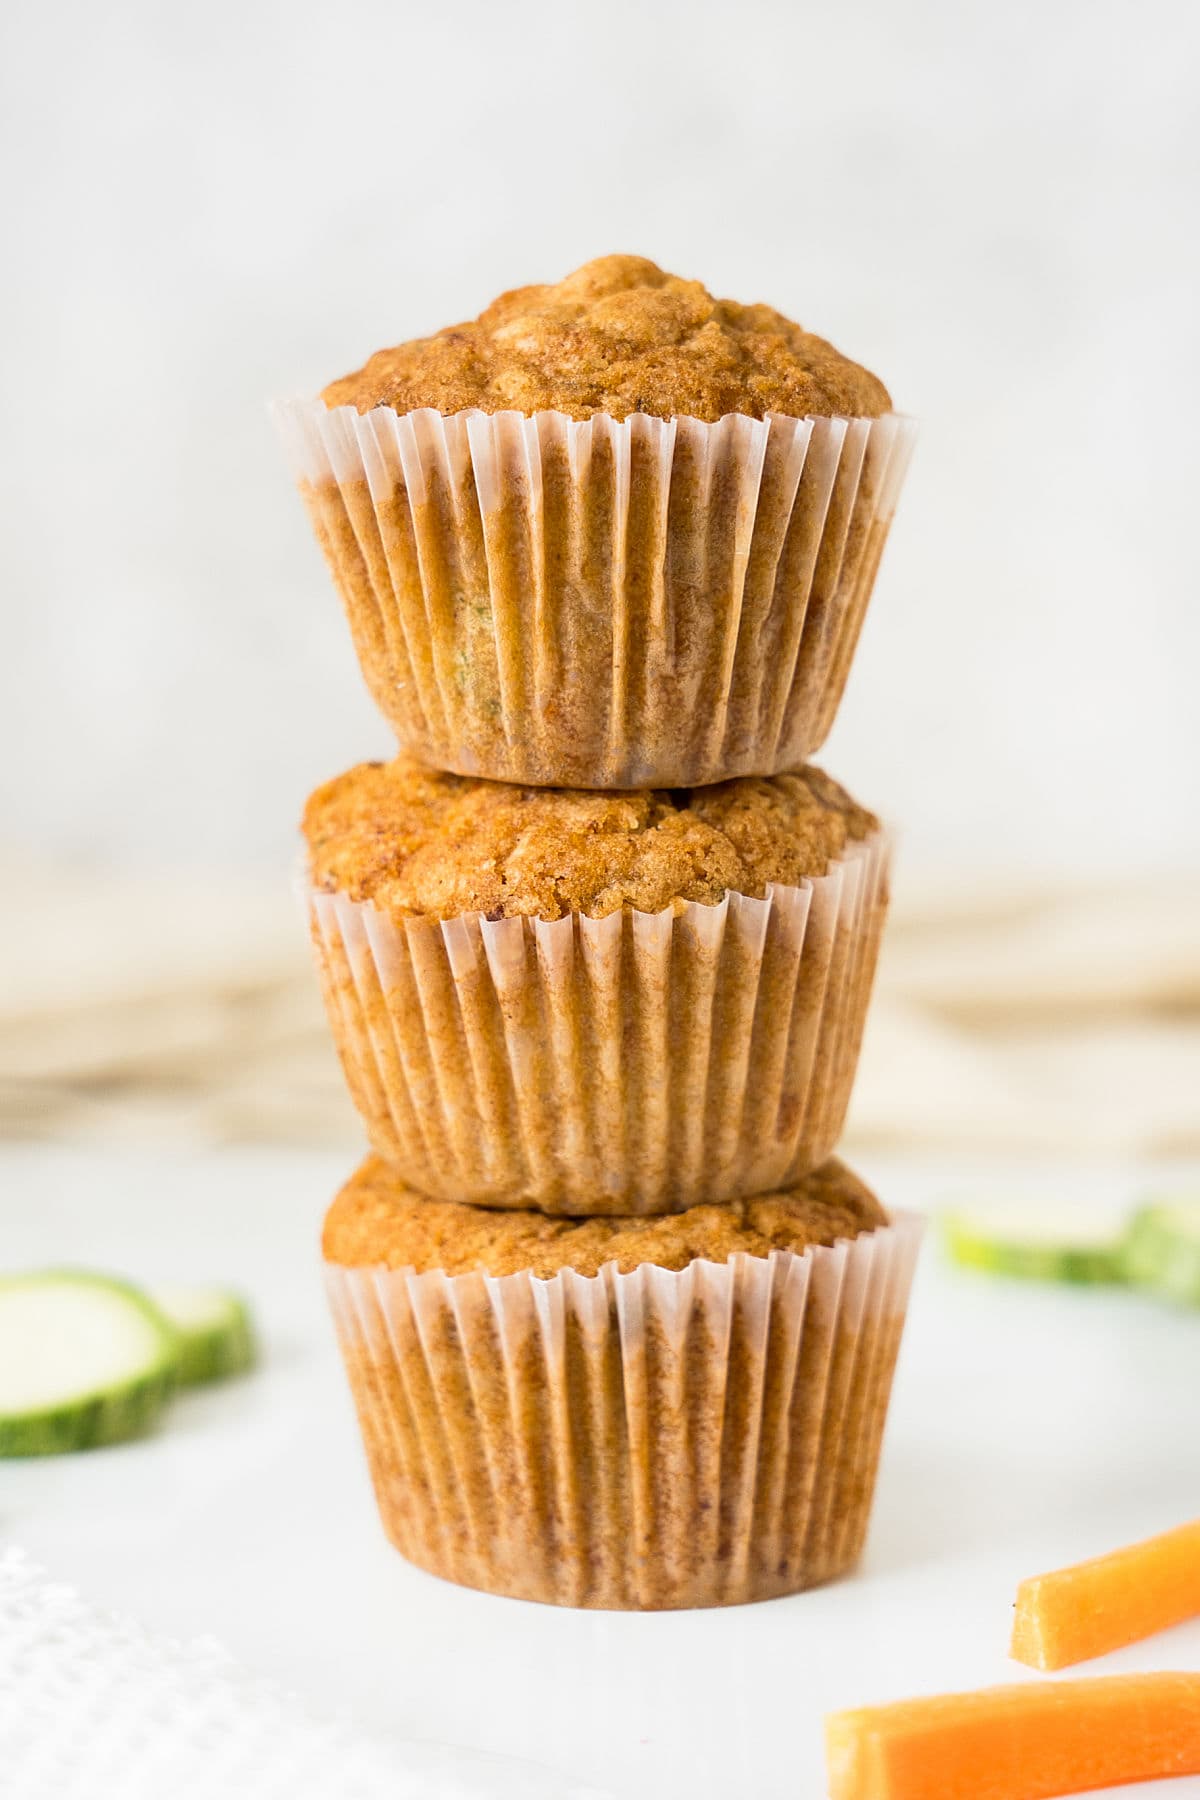 Three stacked carrot zucchini muffins in paper liners. White surface and background.